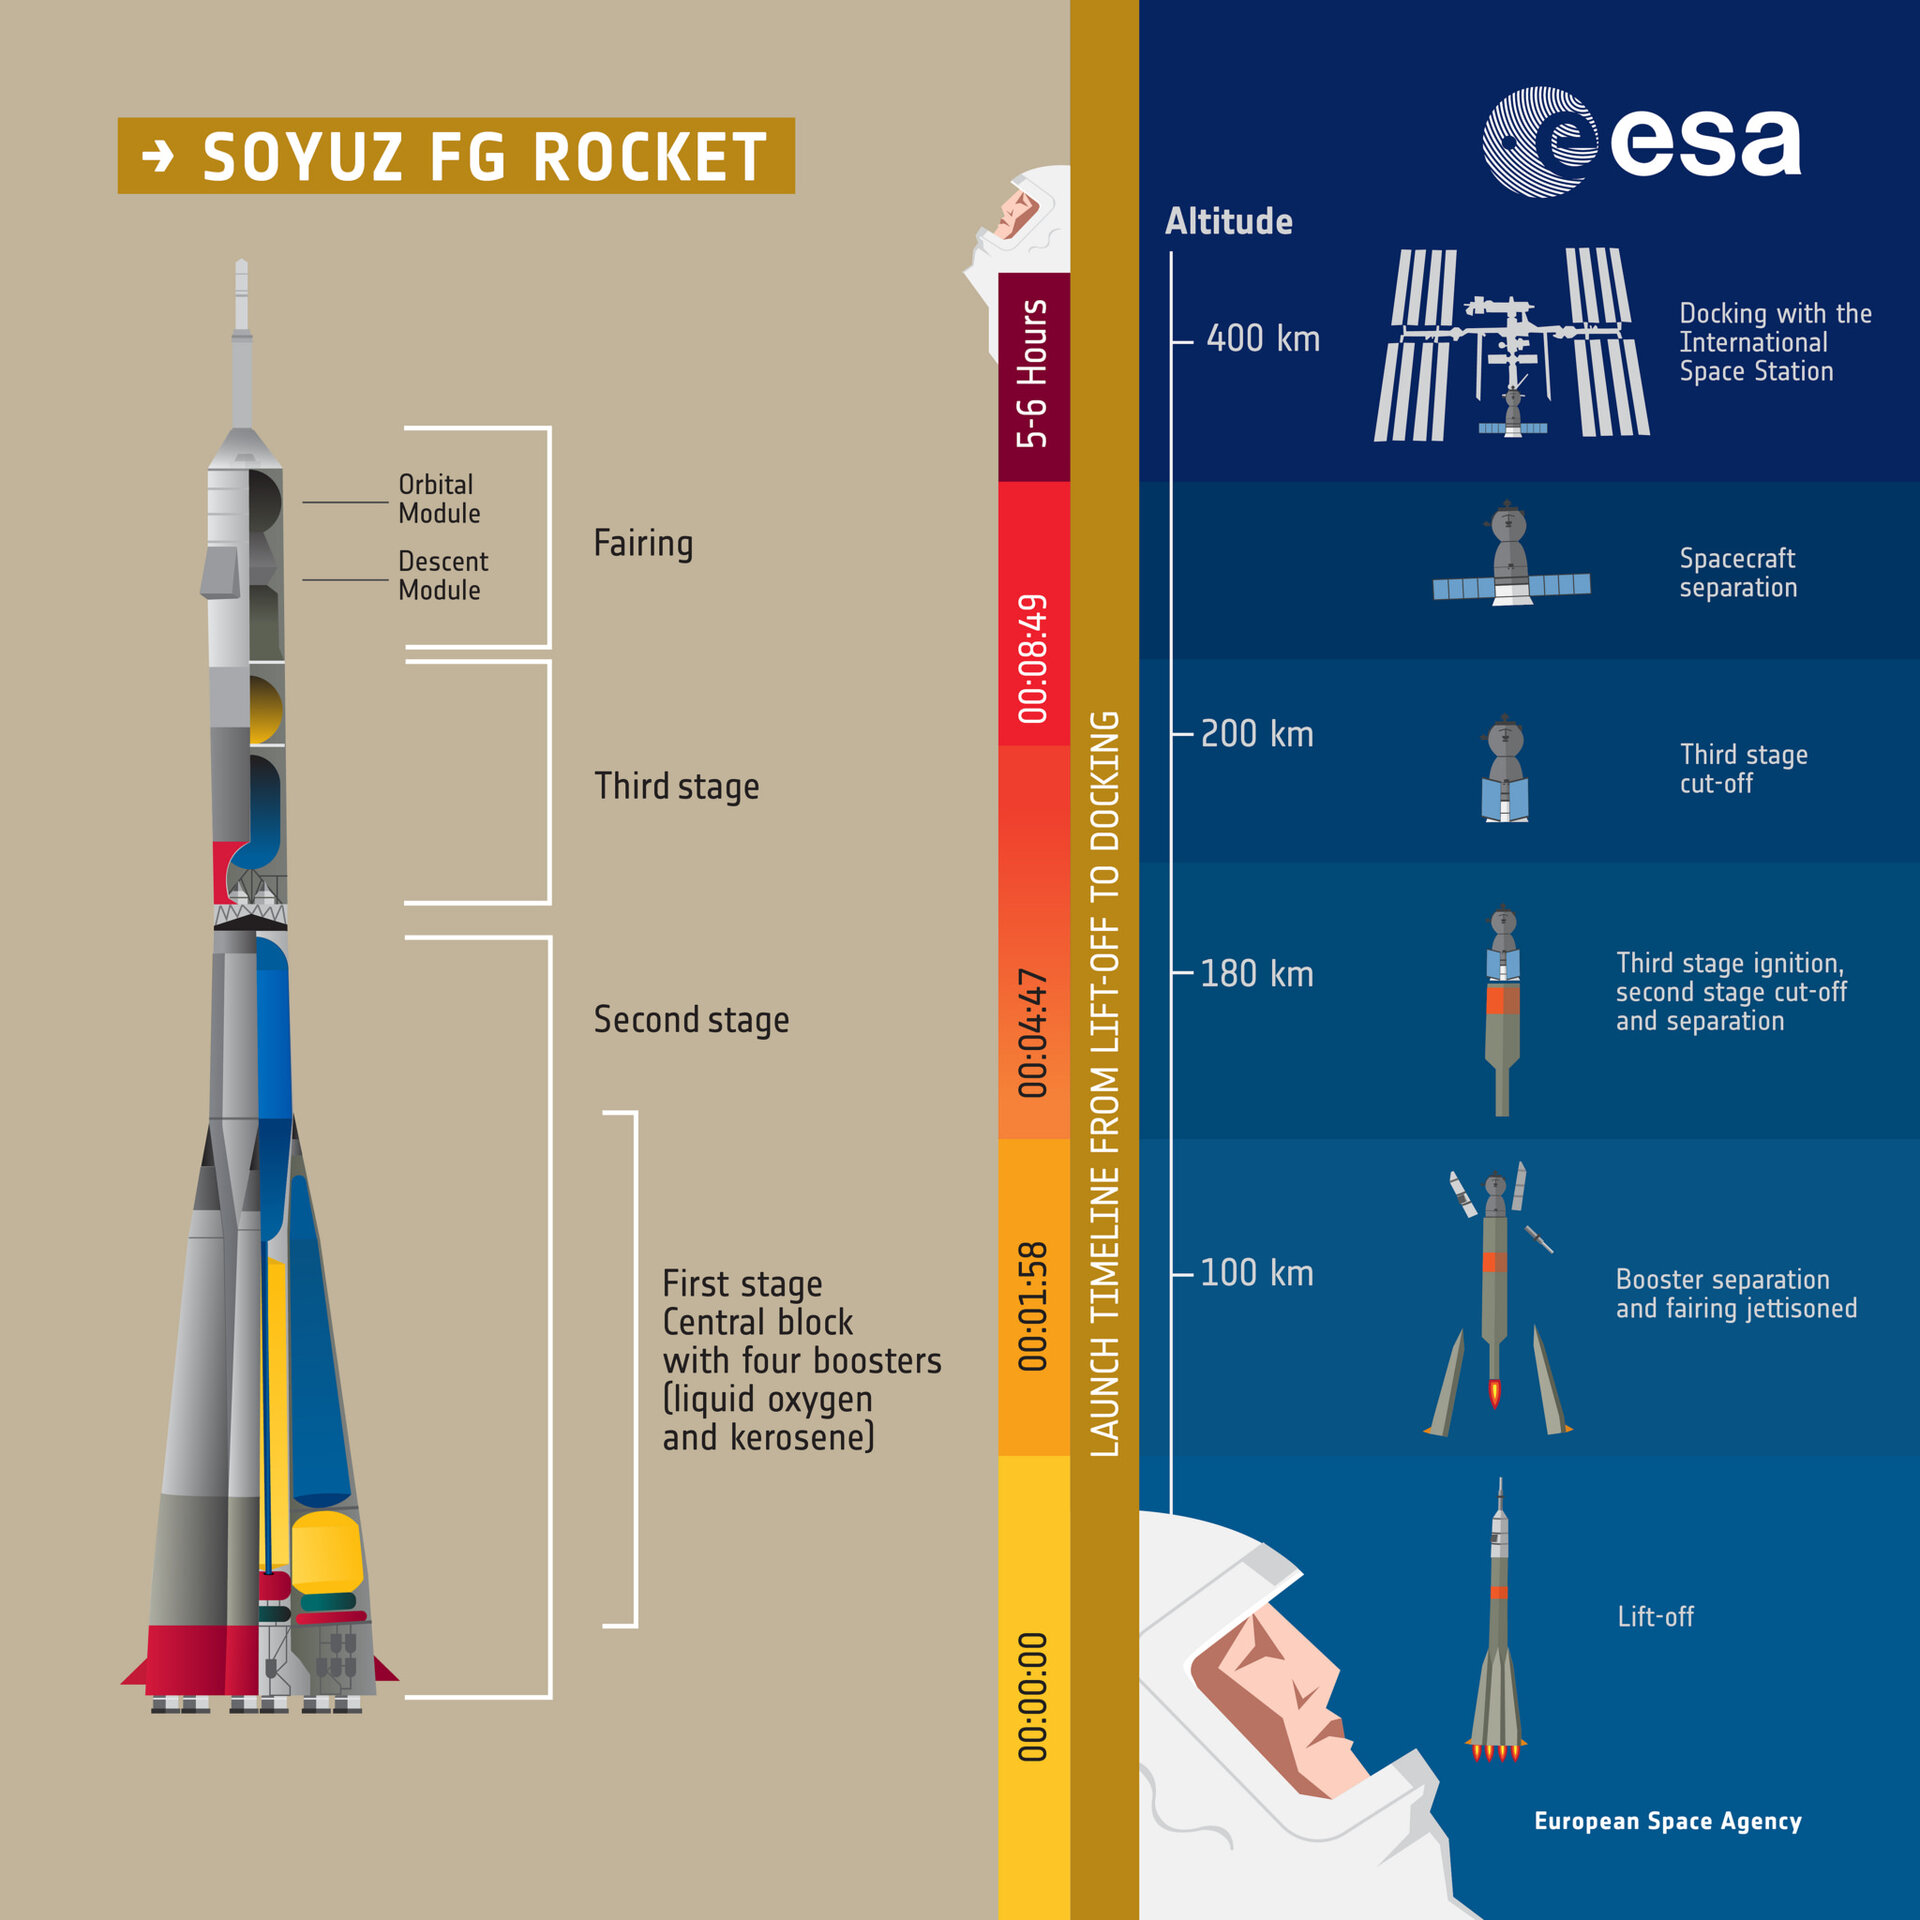 Soyuz FG rocket and liftoff sequence 